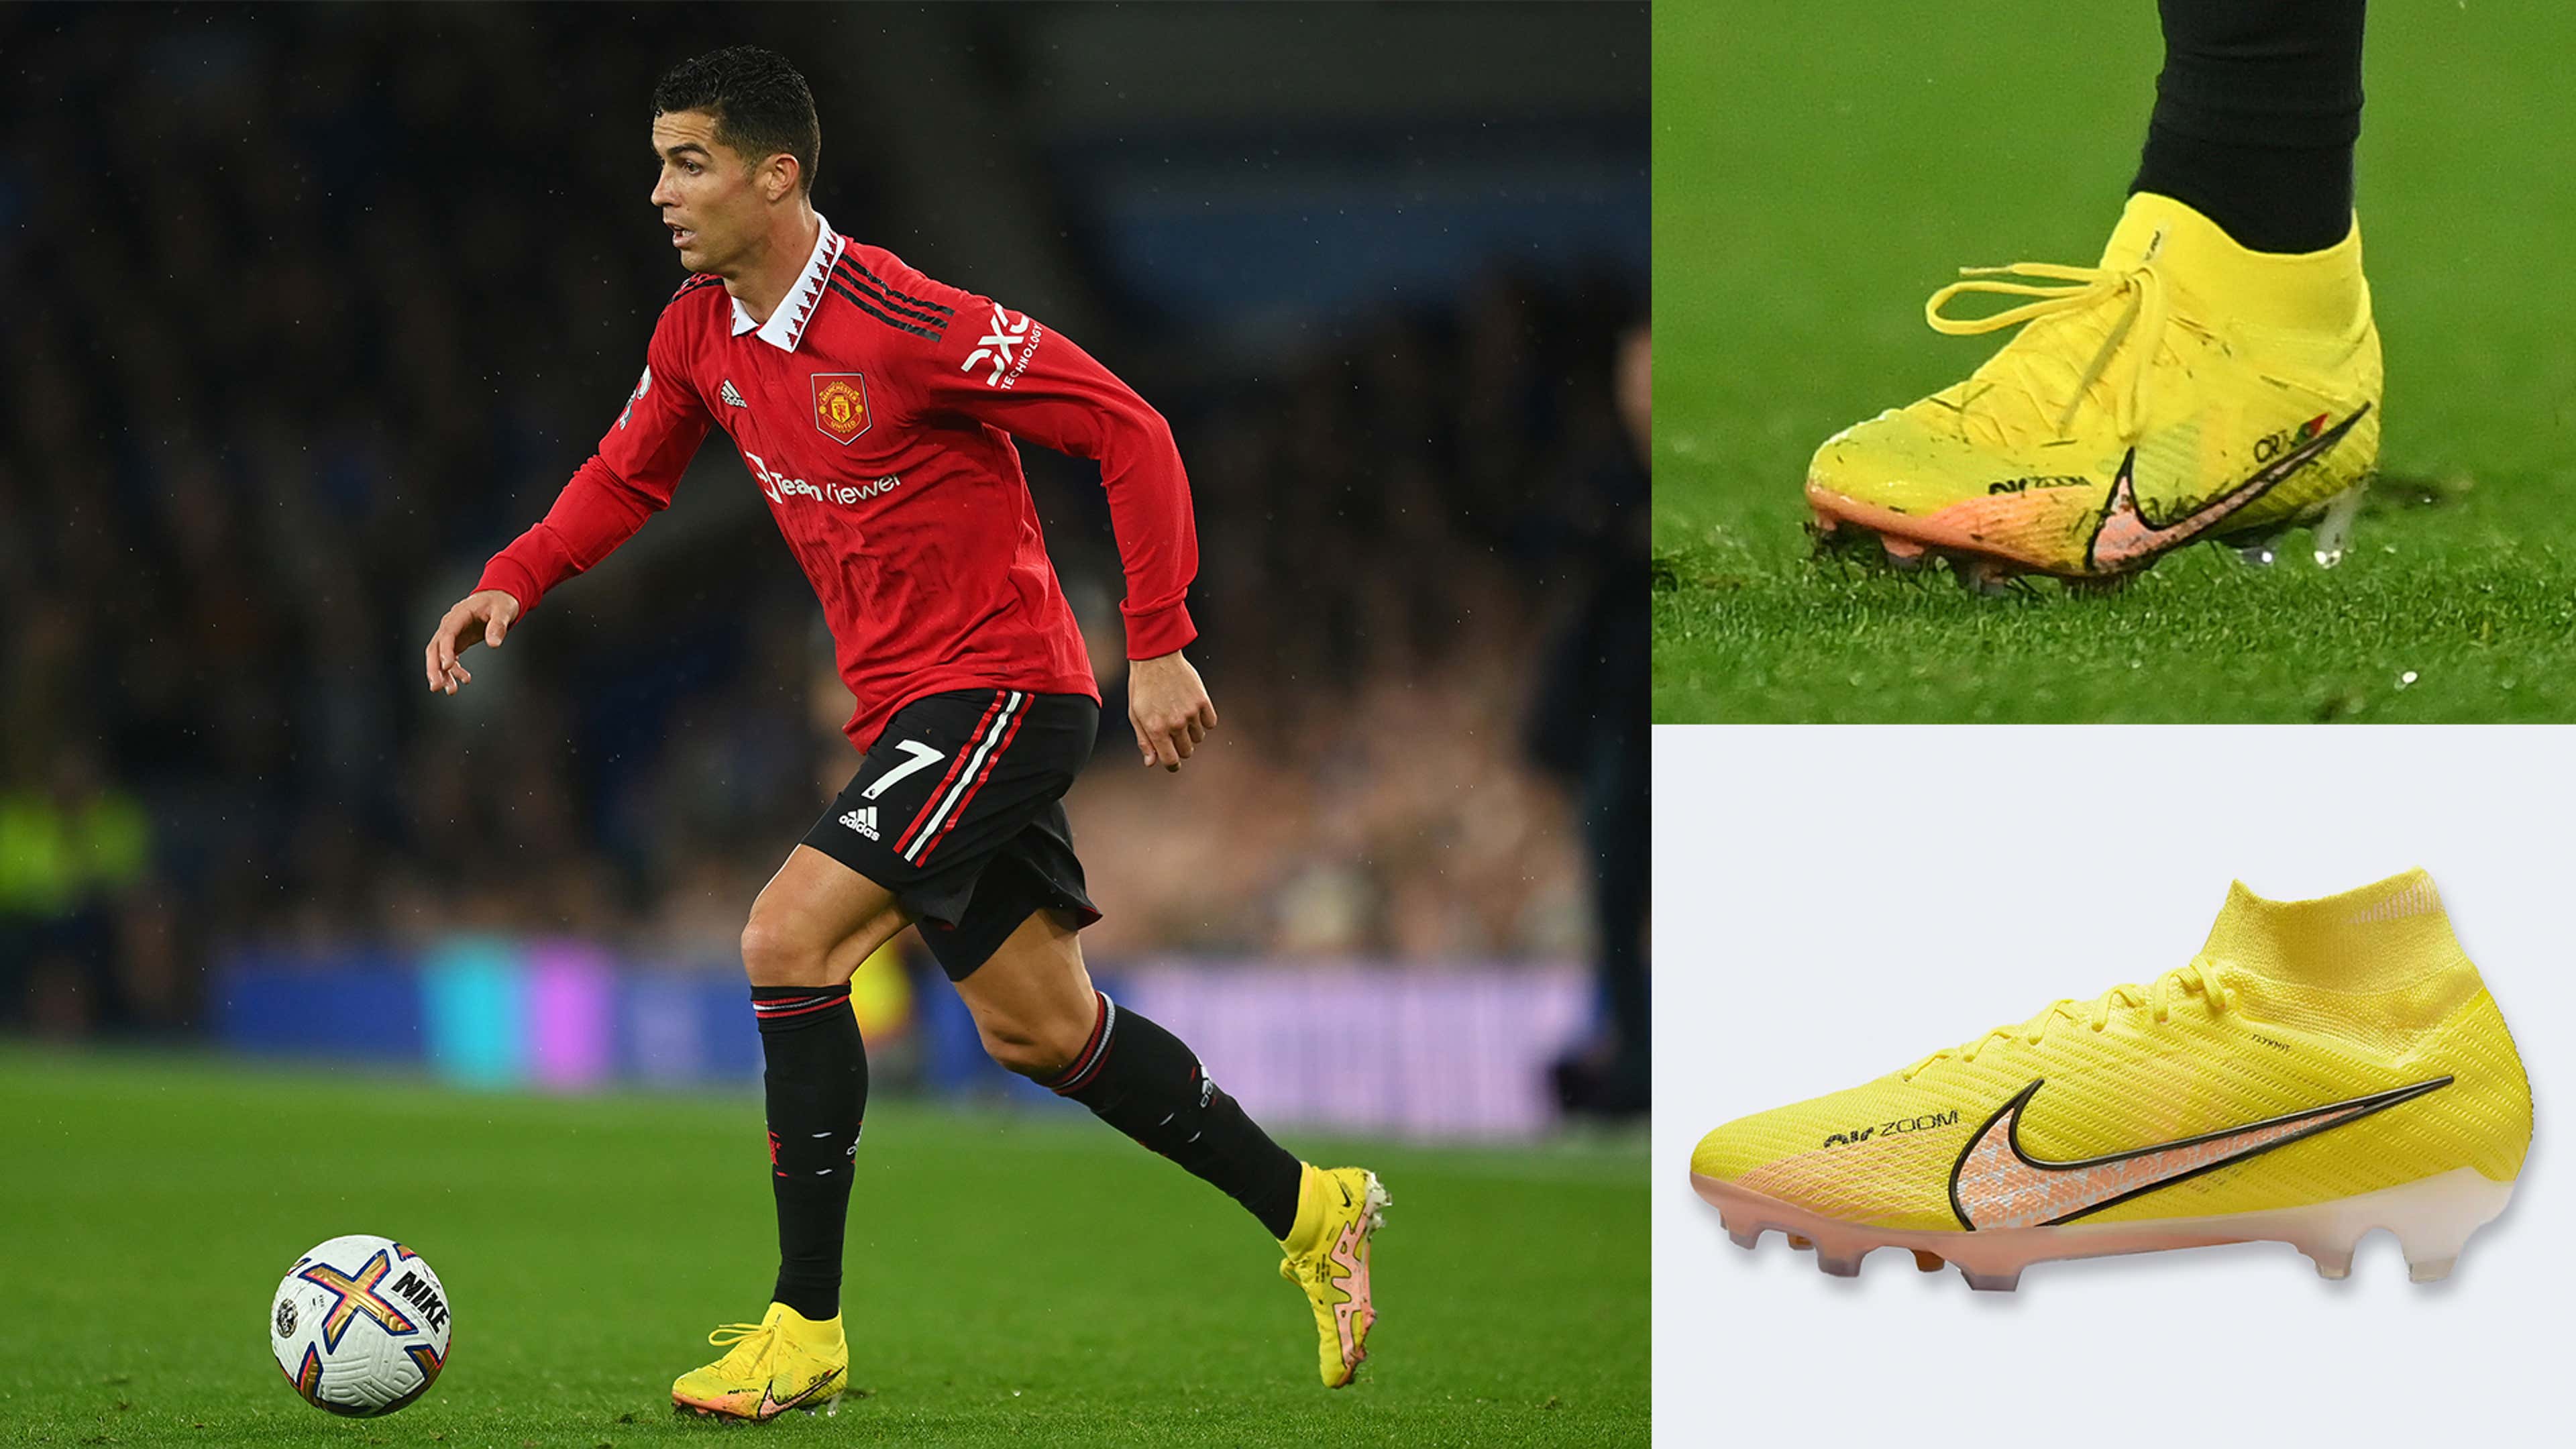 The most popular football boots worn by today's best players: What